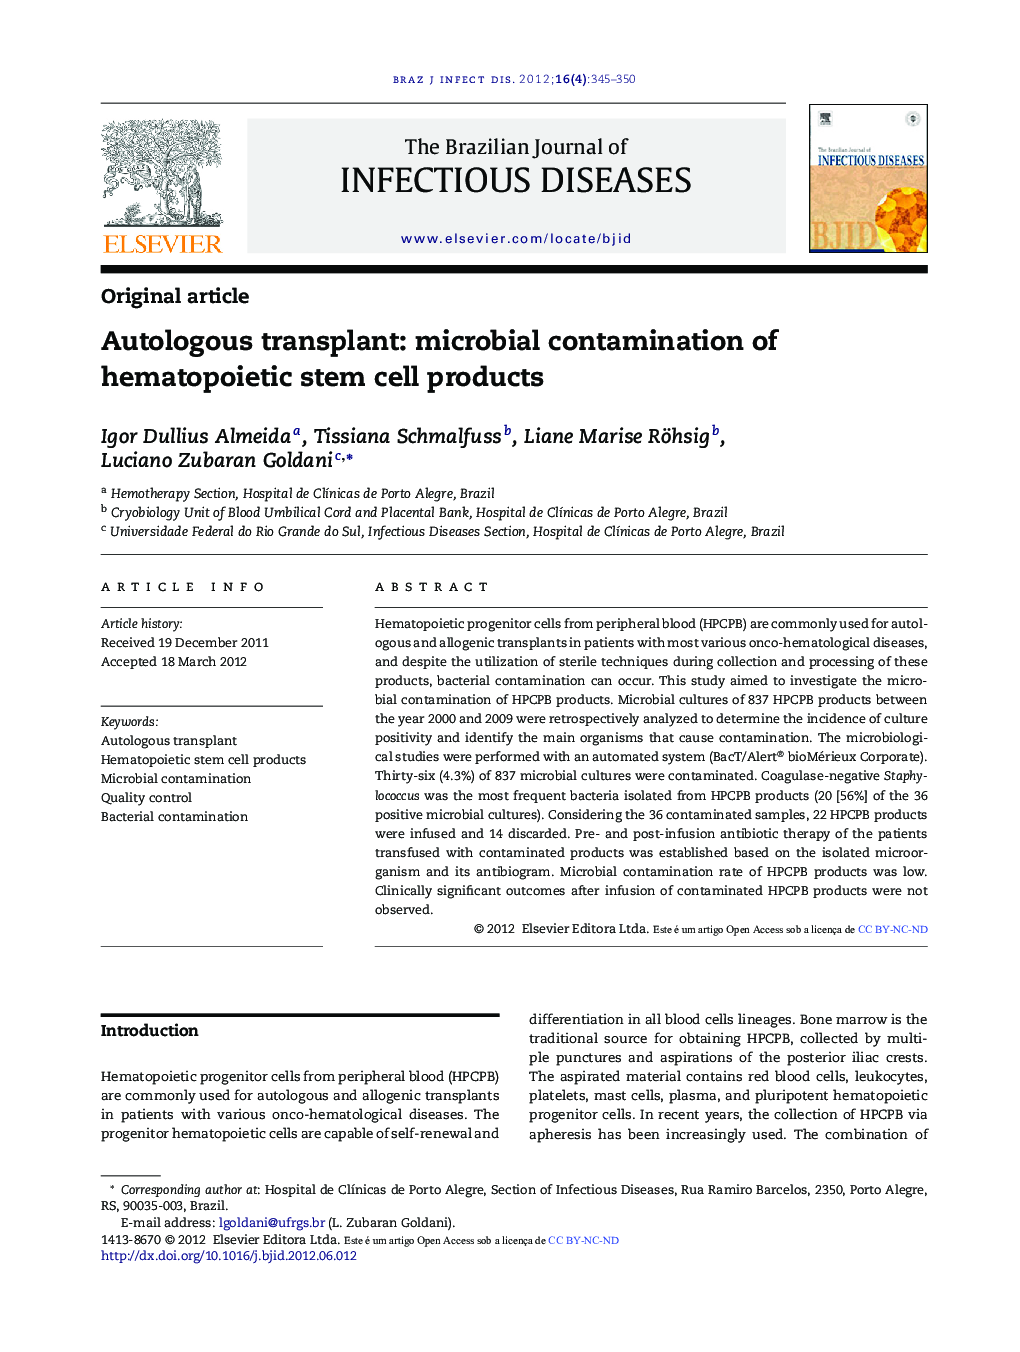 Autologous transplant: microbial contamination of hematopoietic stem cell products